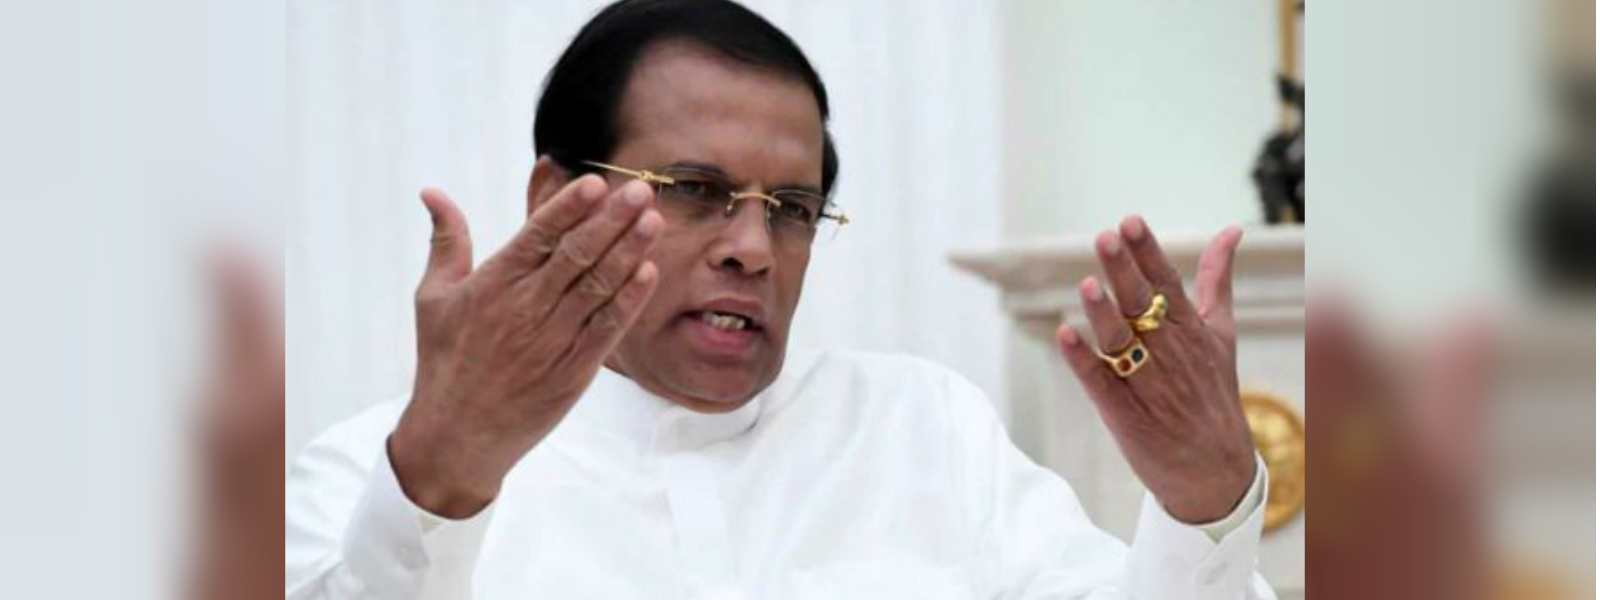 “I will contest the election, not come through the national list” – Former President Maithripala Sirisena